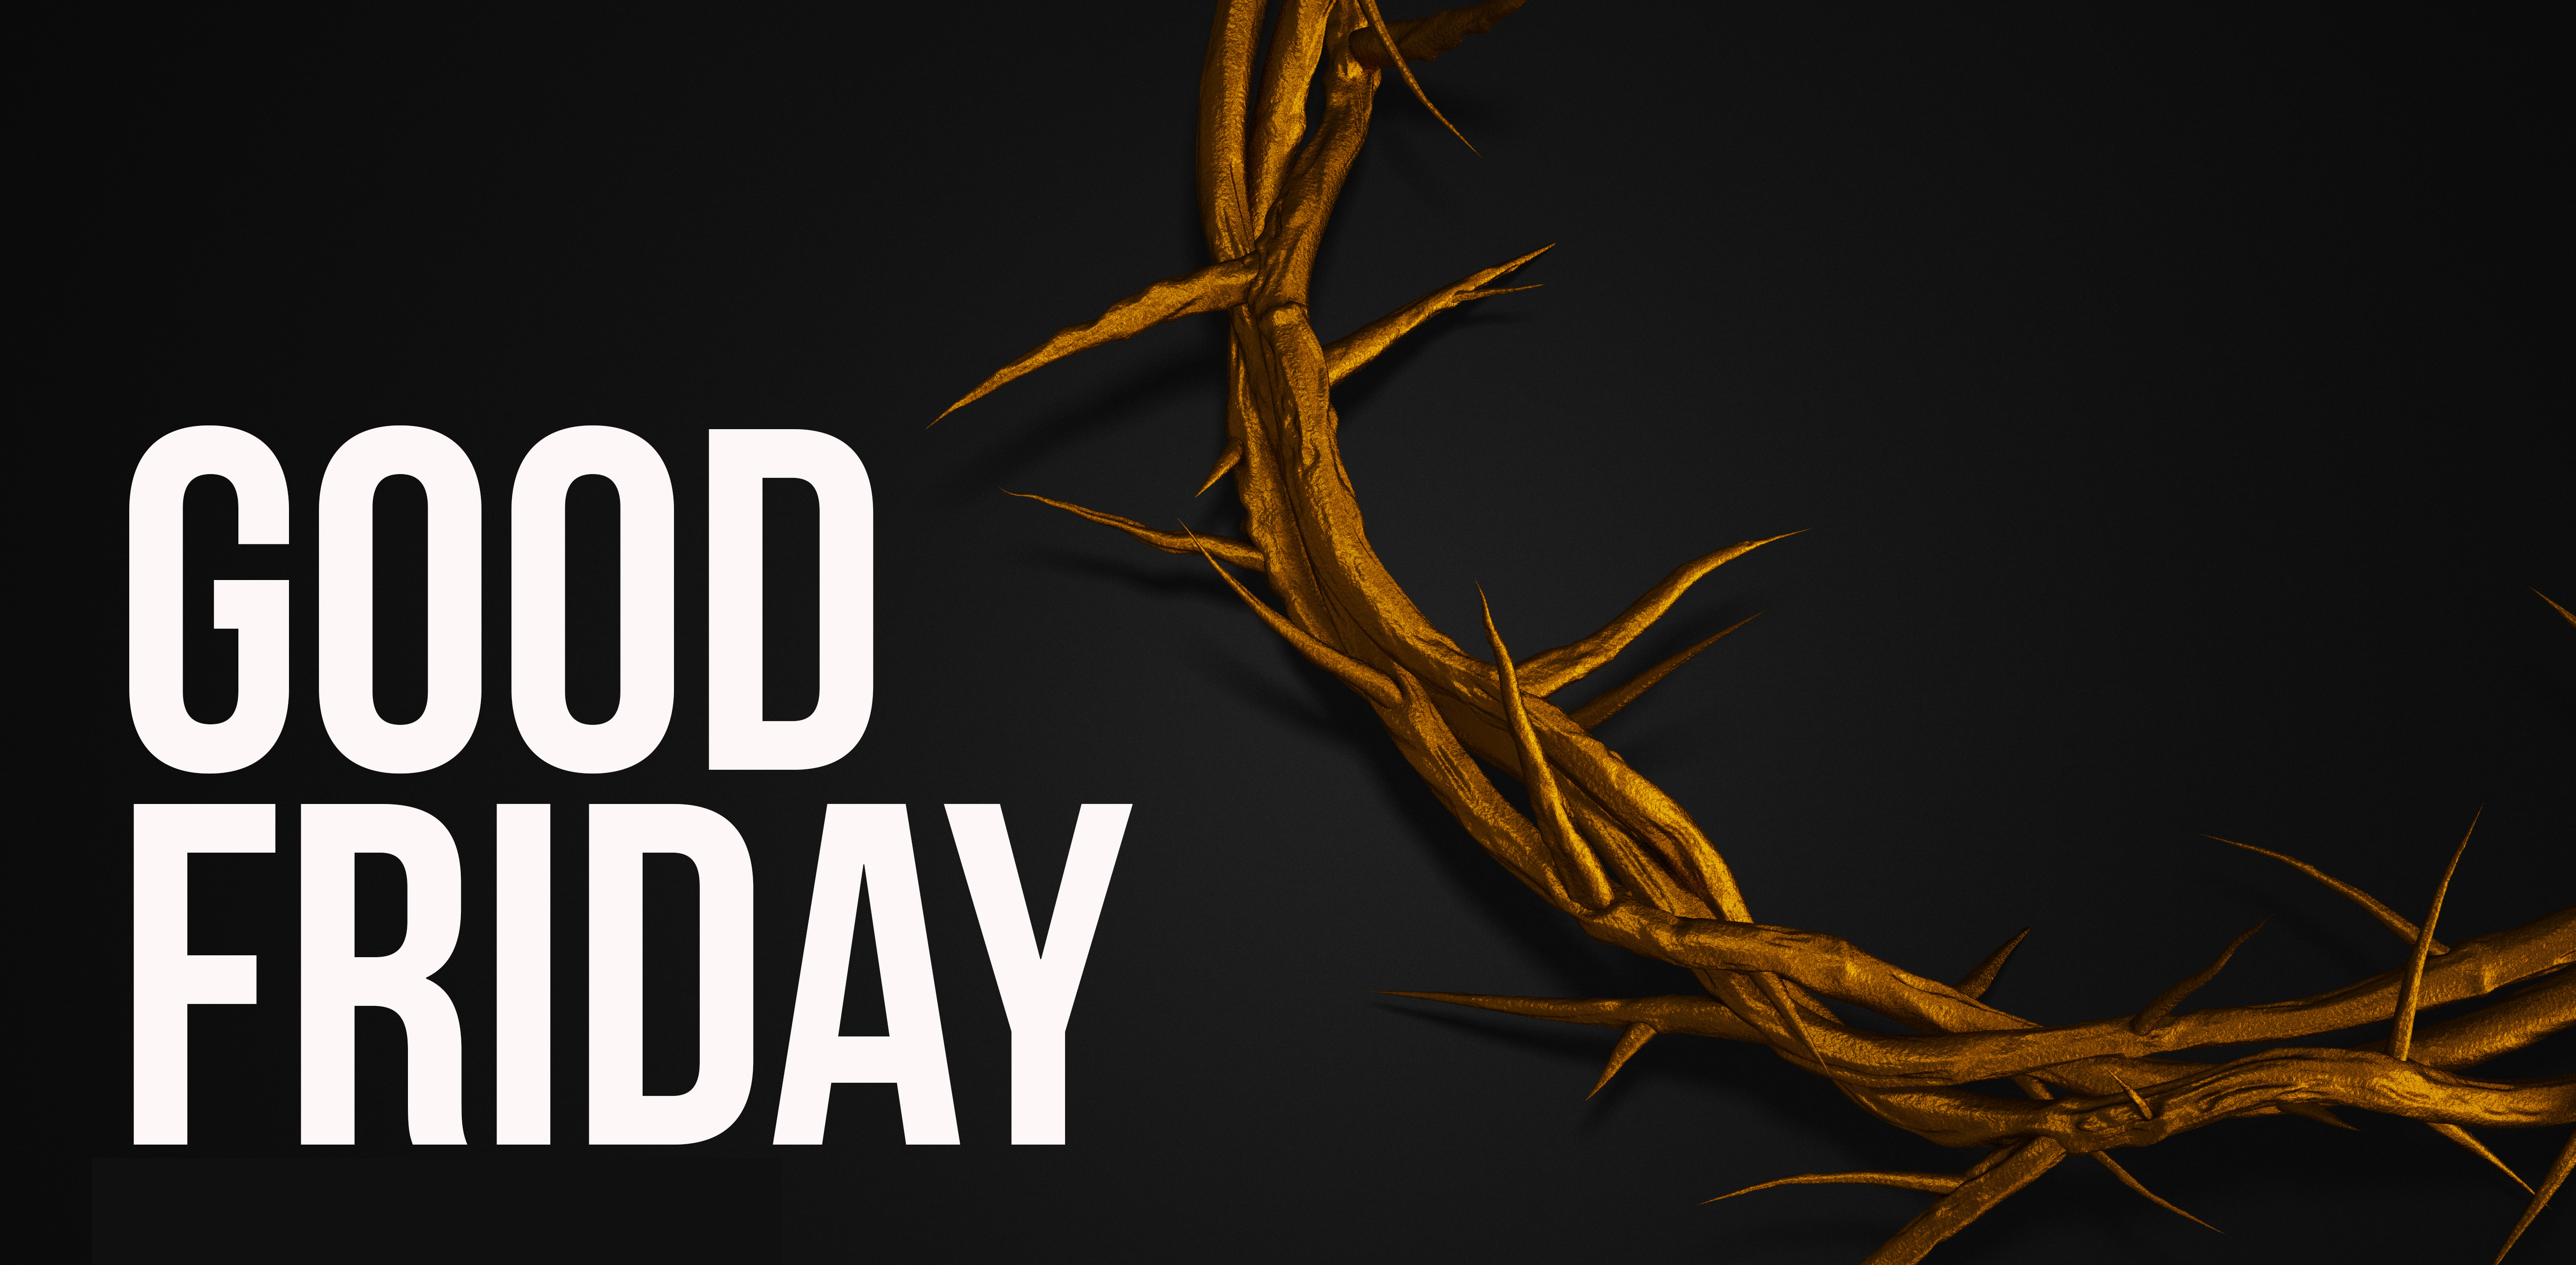 Good Friday Gold Crown of Thorns